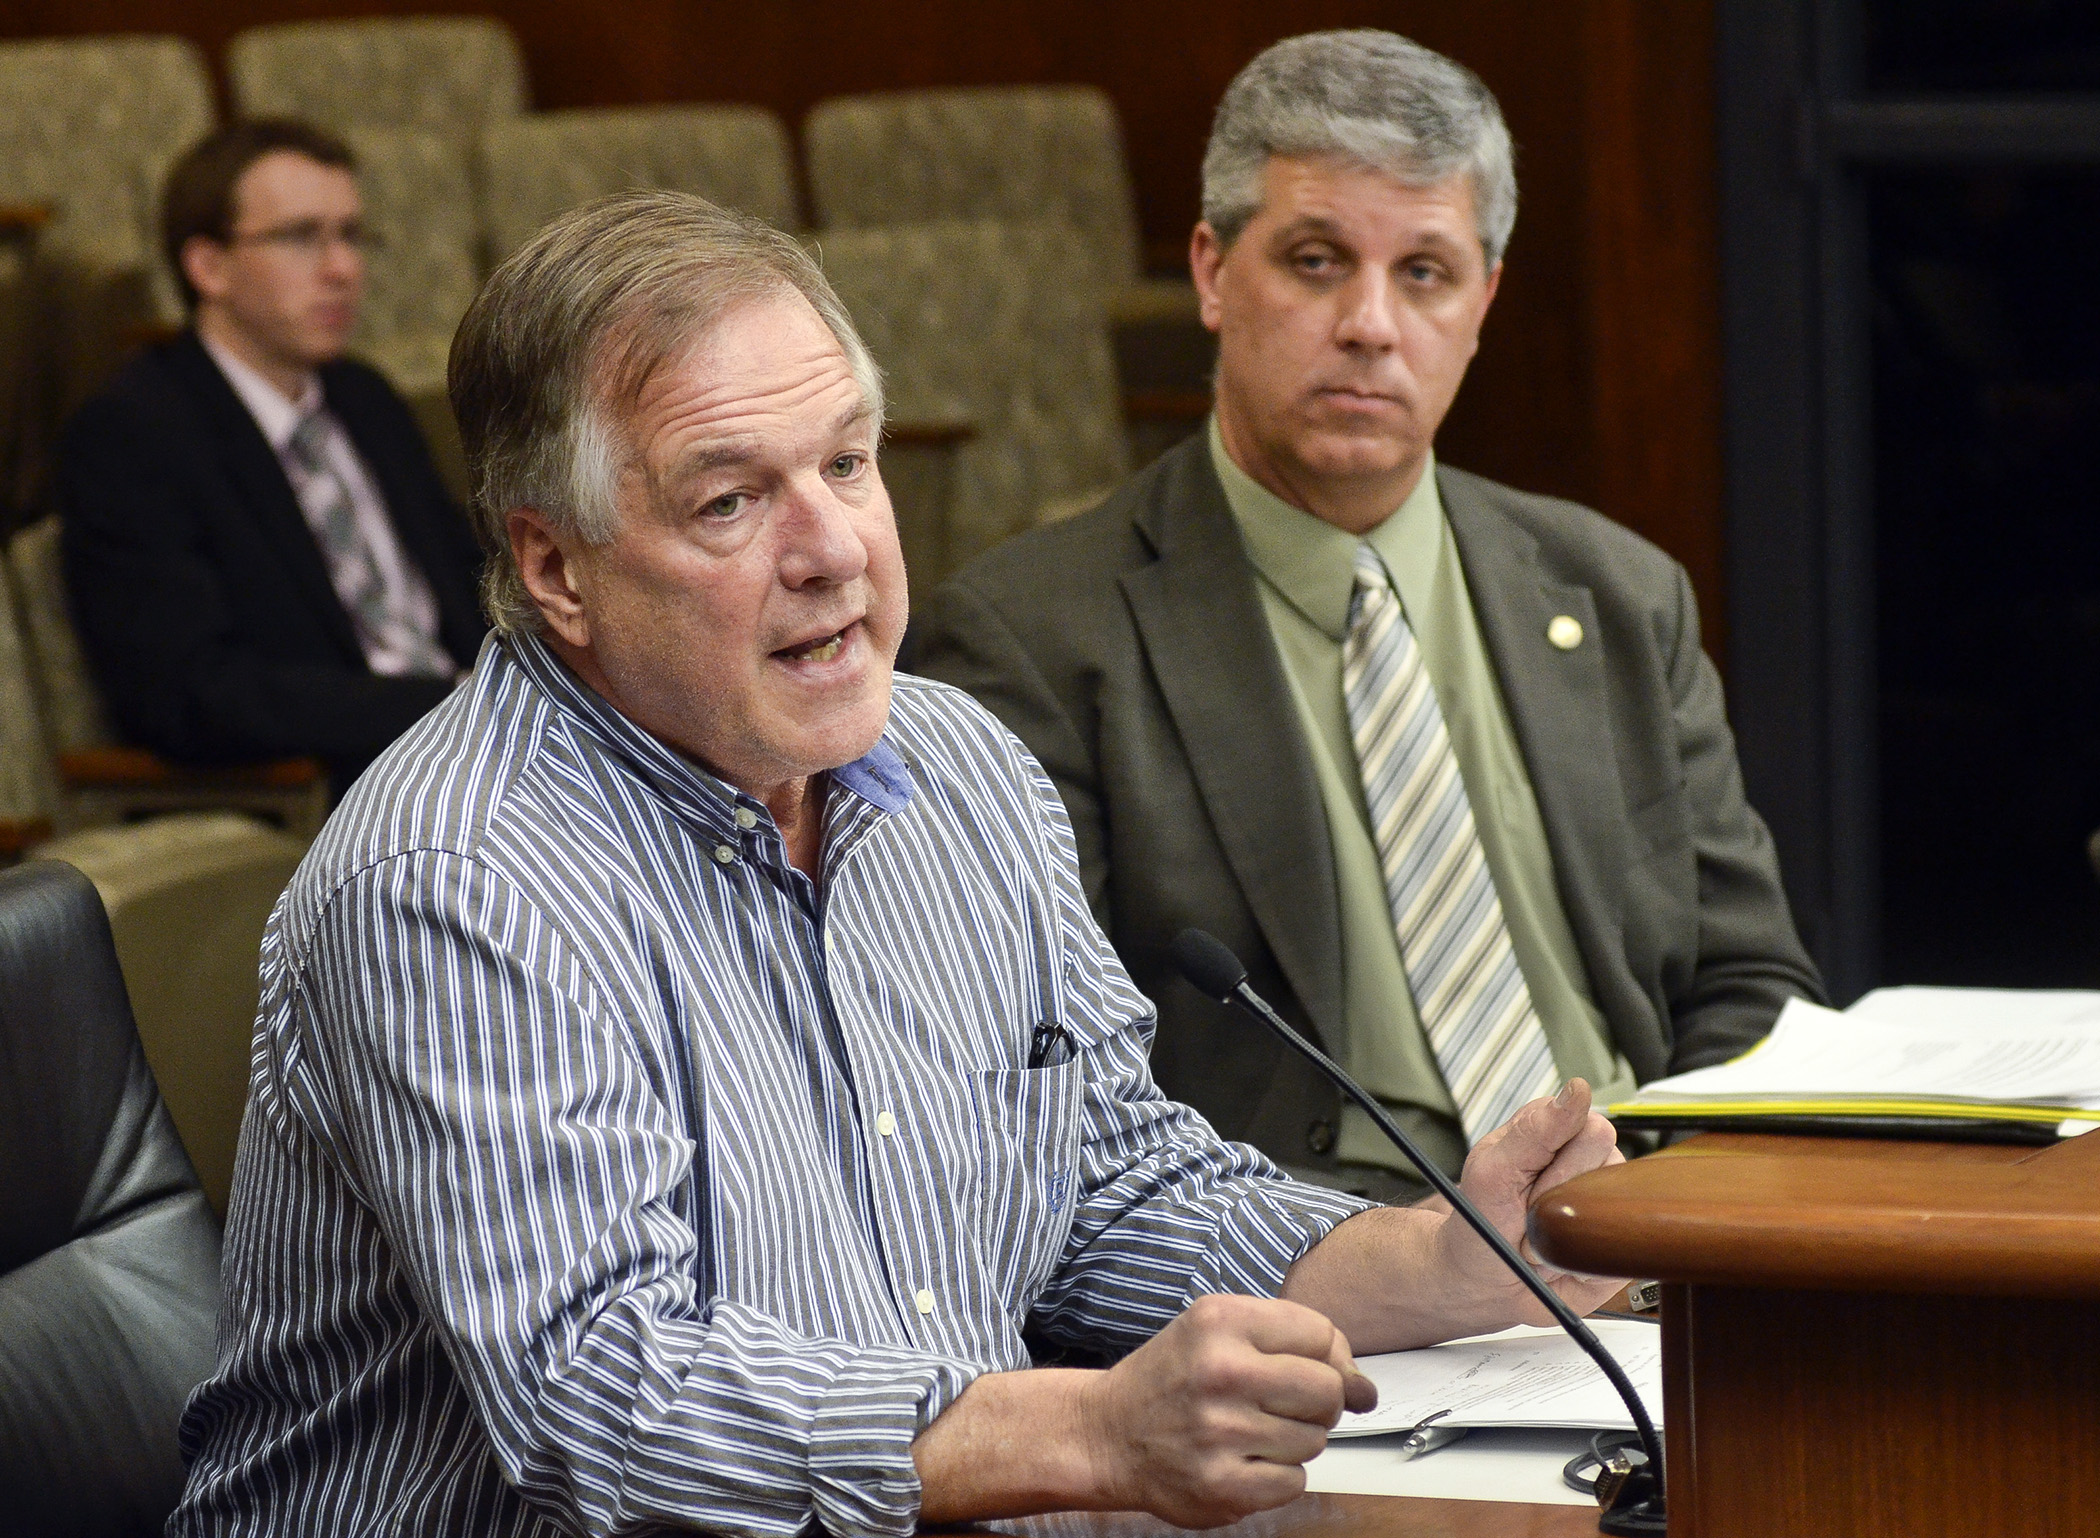 Bill Eno, who owns and operates Twin Pines Resort in Garrison, testifies before the House Mining and Outdoor Recreation Policy Committee Feb. 10 in support of a bill sponsored by Rep. Steve Drazkowski, right, that would repeal aquatic invasive species prevention requirements. Photo by Andrew VonBank